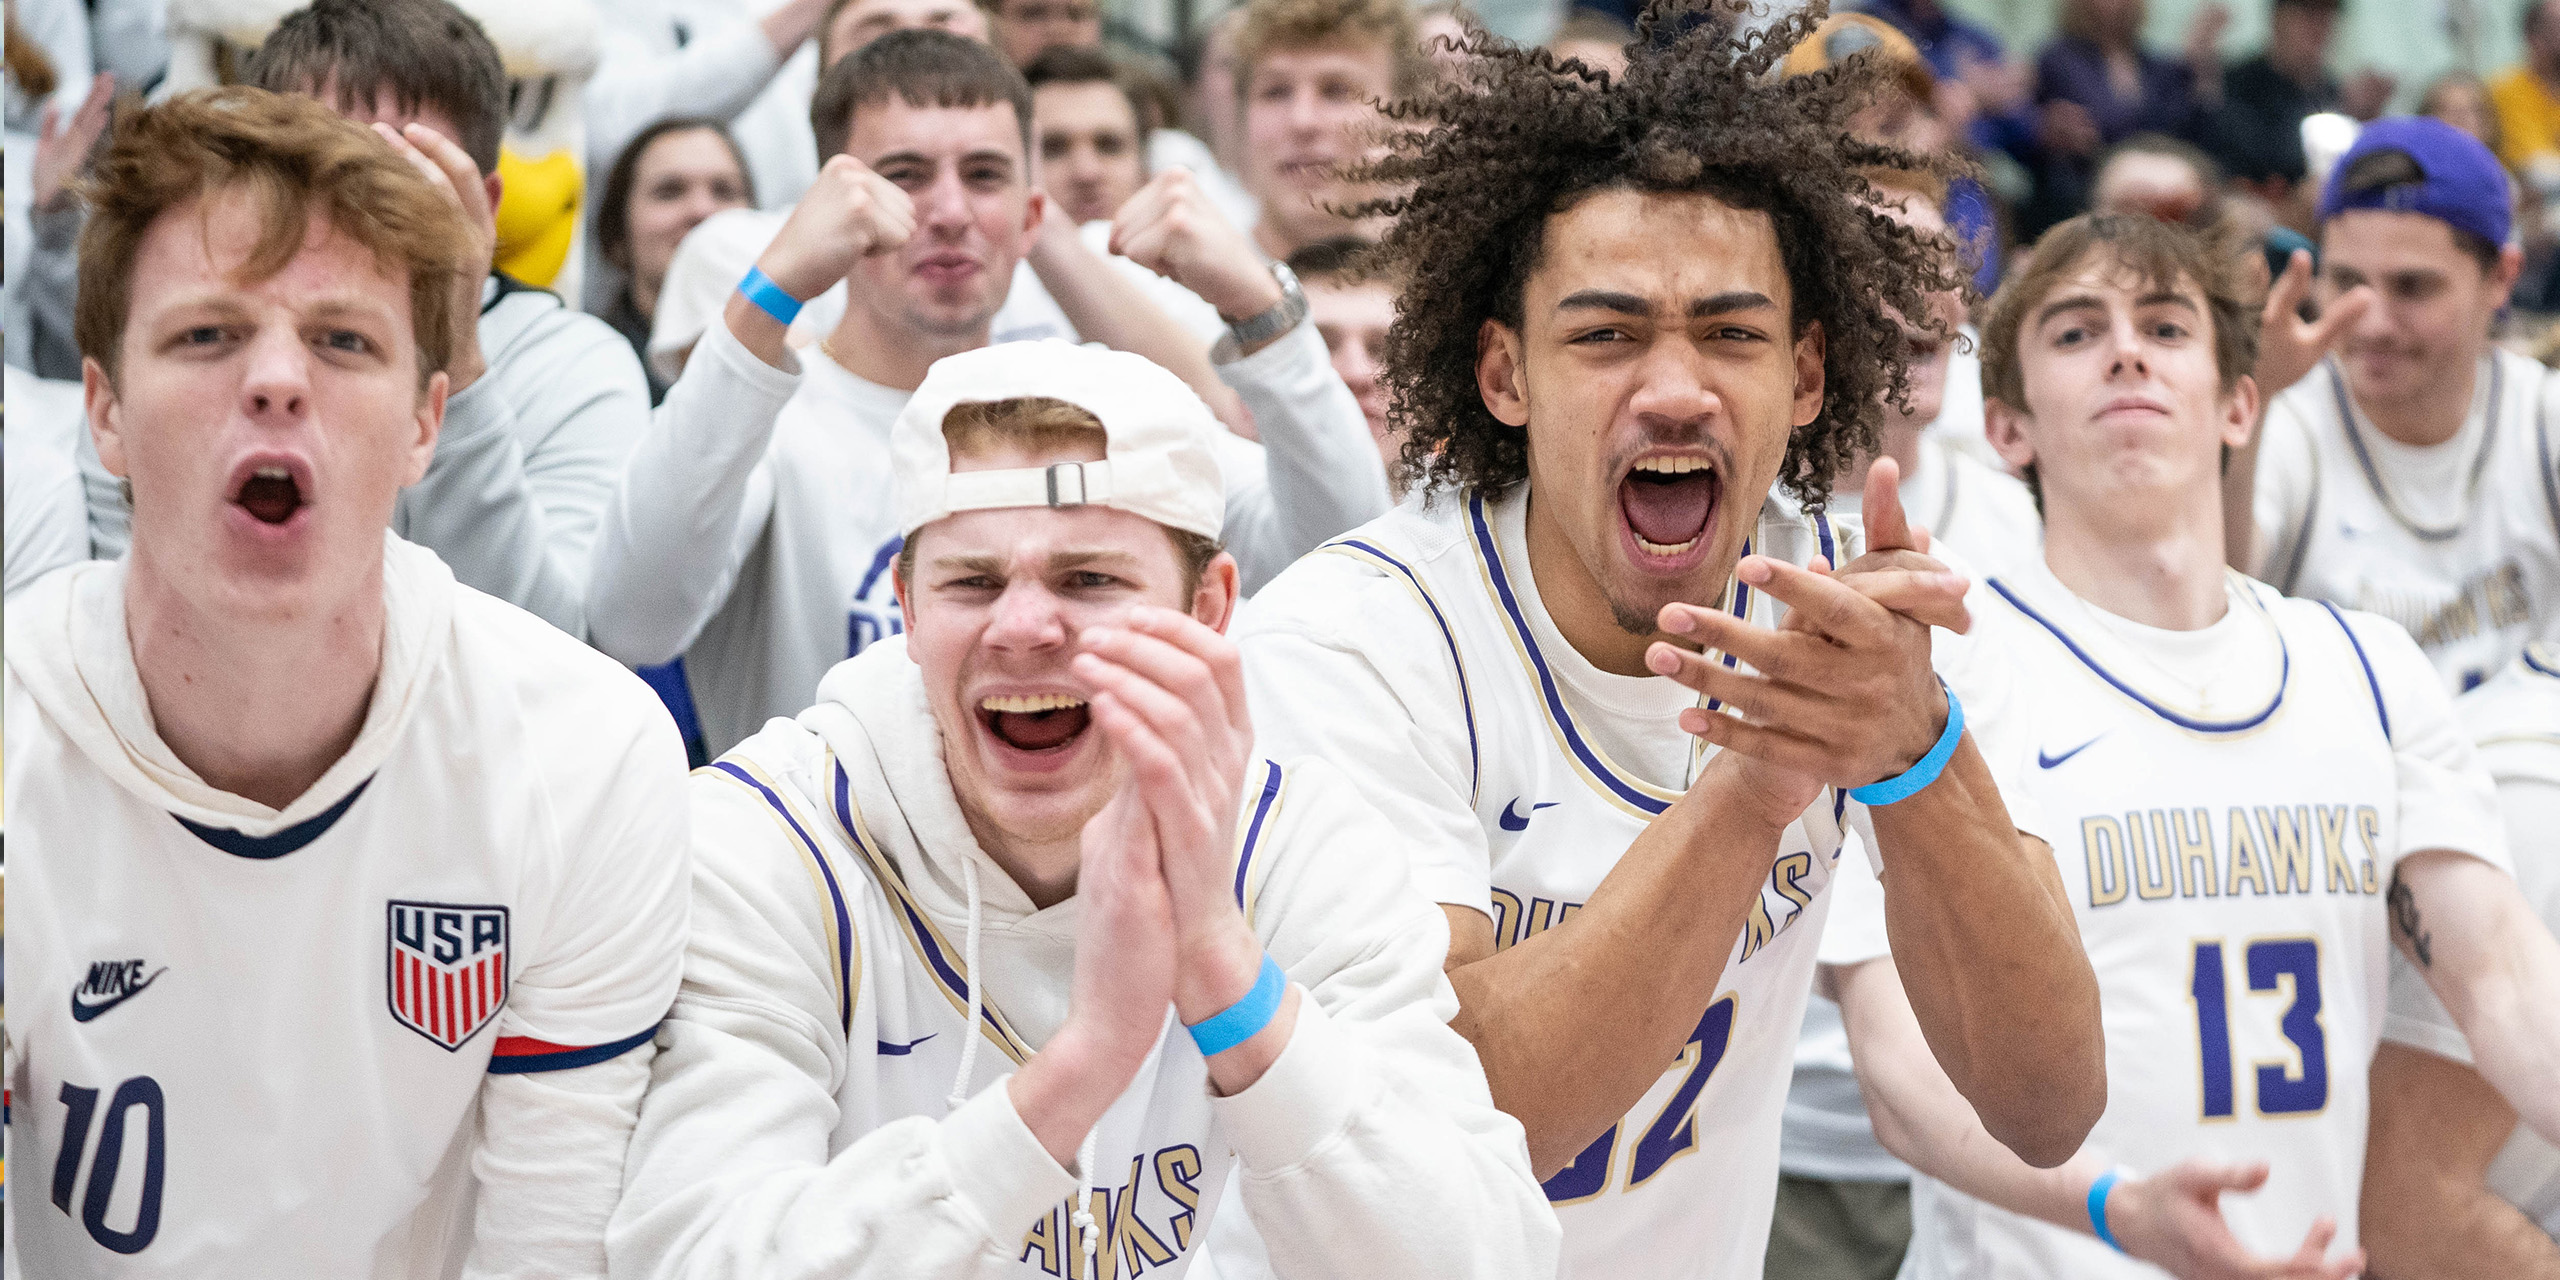 Loras College Basketball players supporting each other during a game